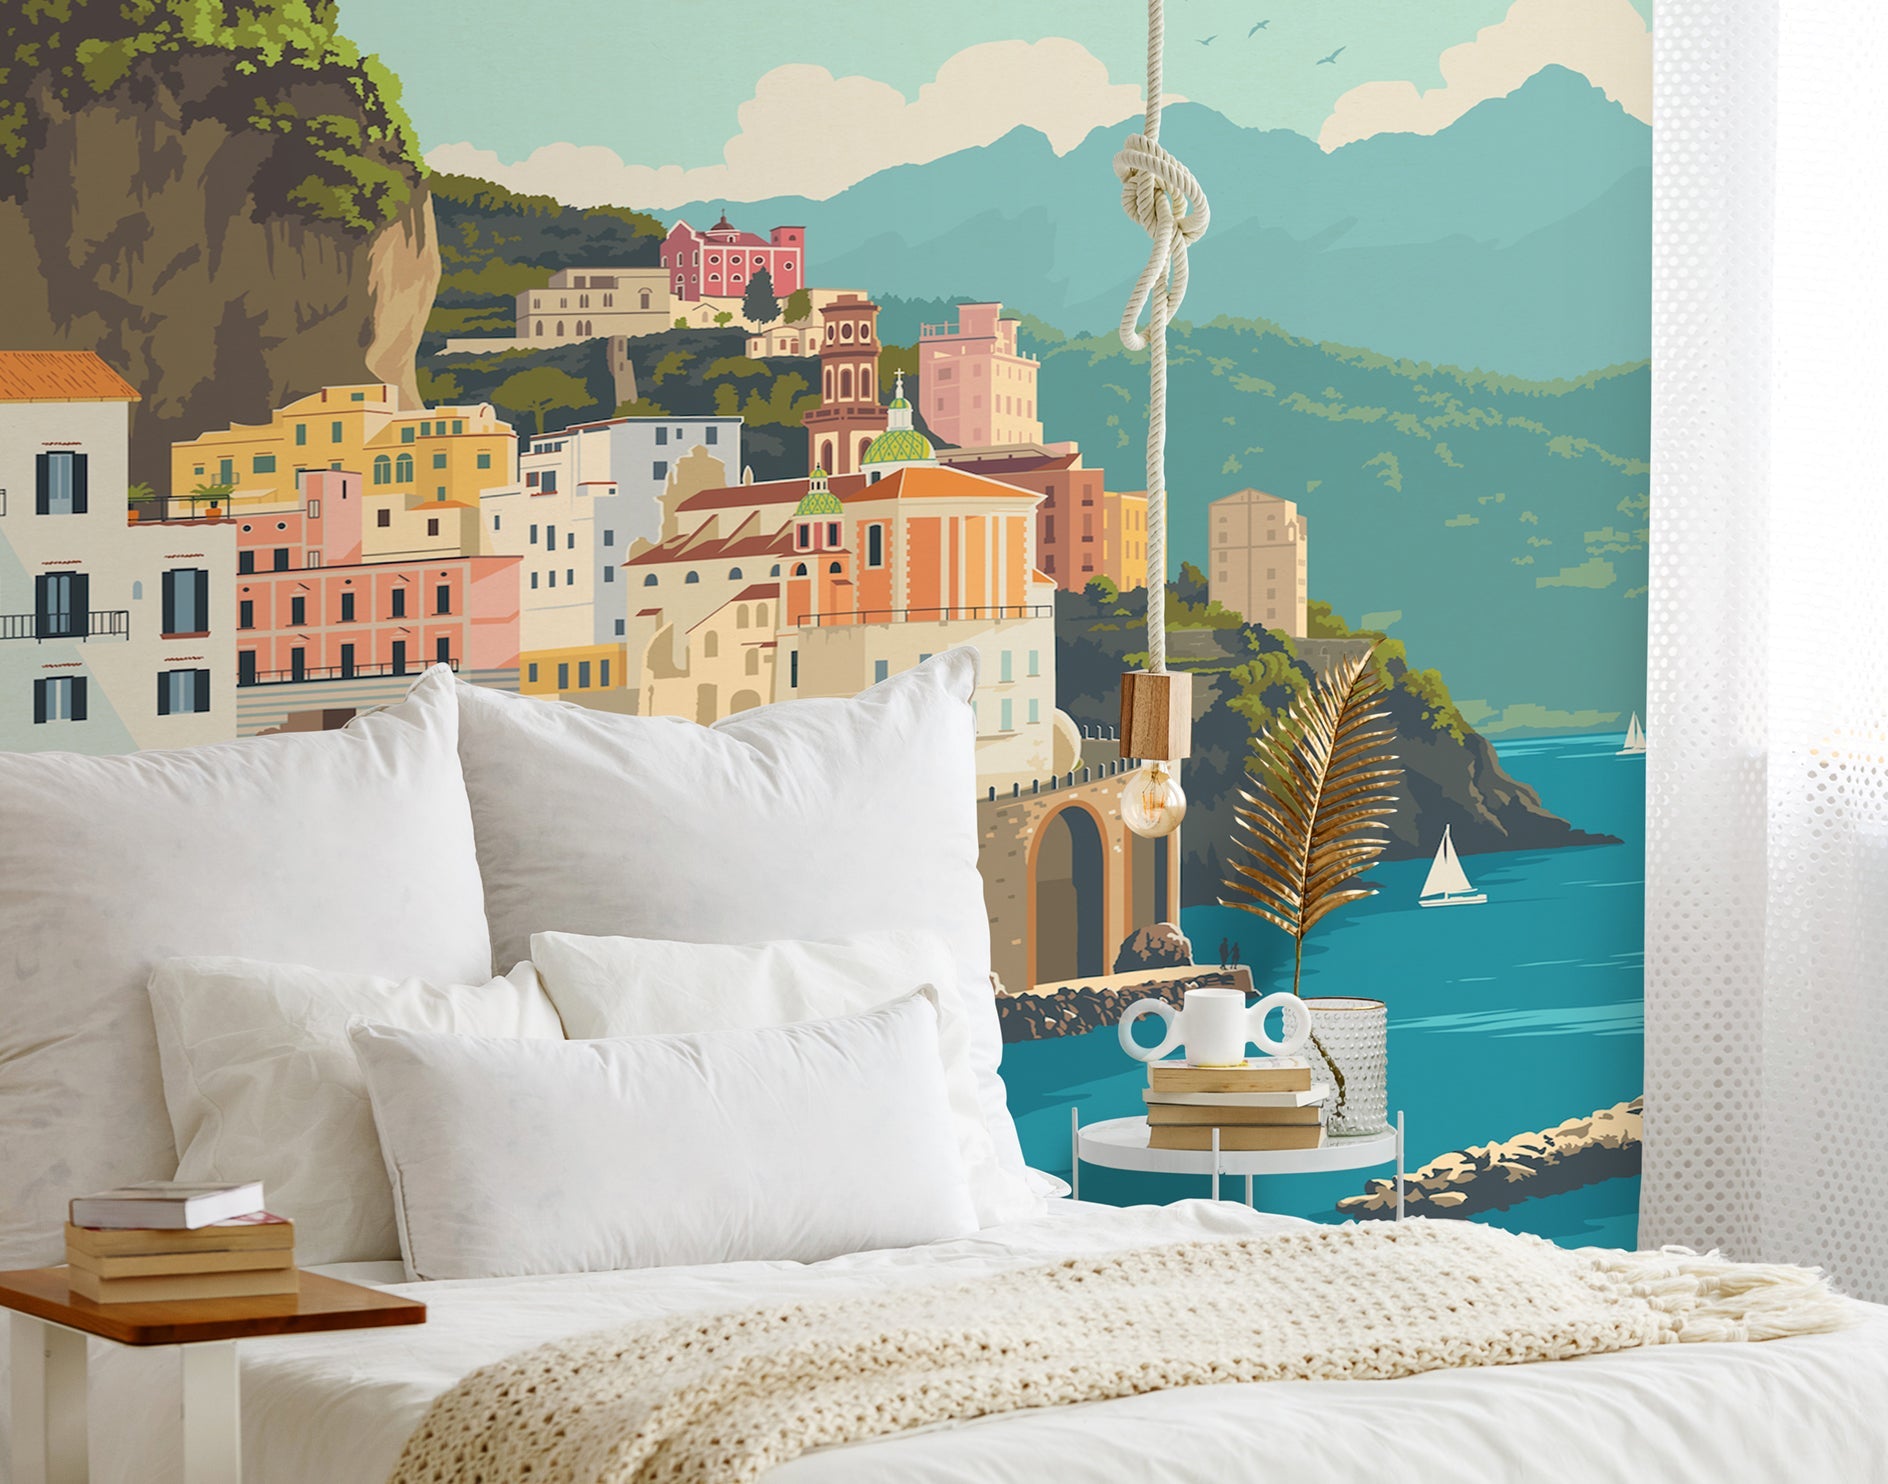 Peel & Stick Wall Mural - Amalfi Coast Italy By Anderson Design Group